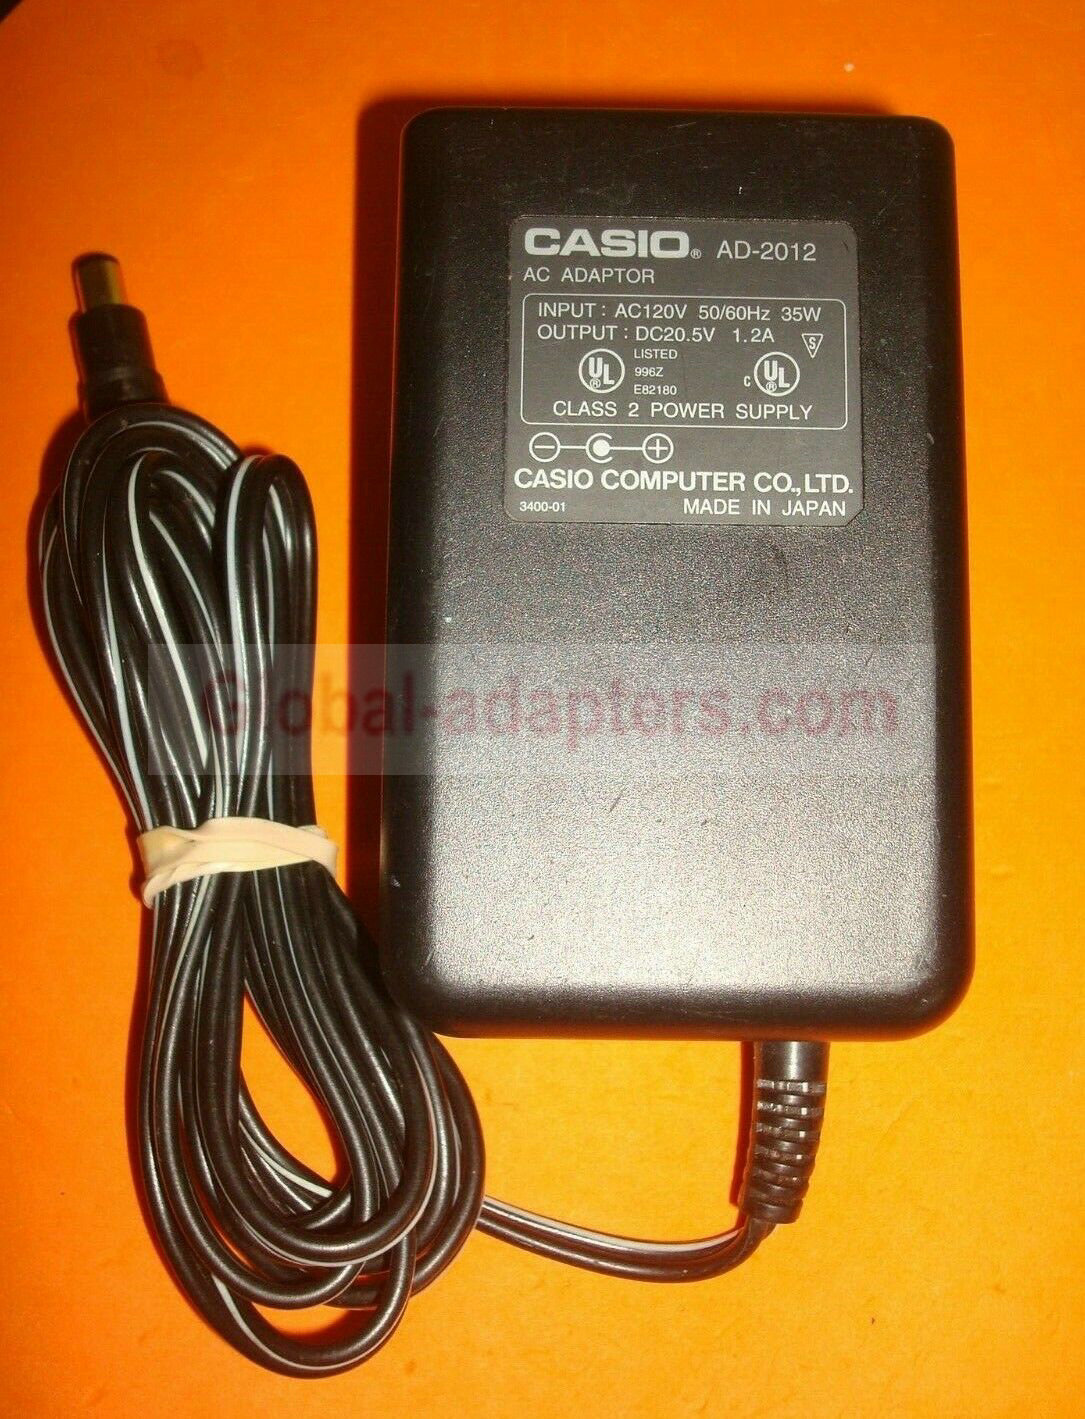 New 20.5V 1.2A Casio AD-2012 Power Supply Ac Adapter